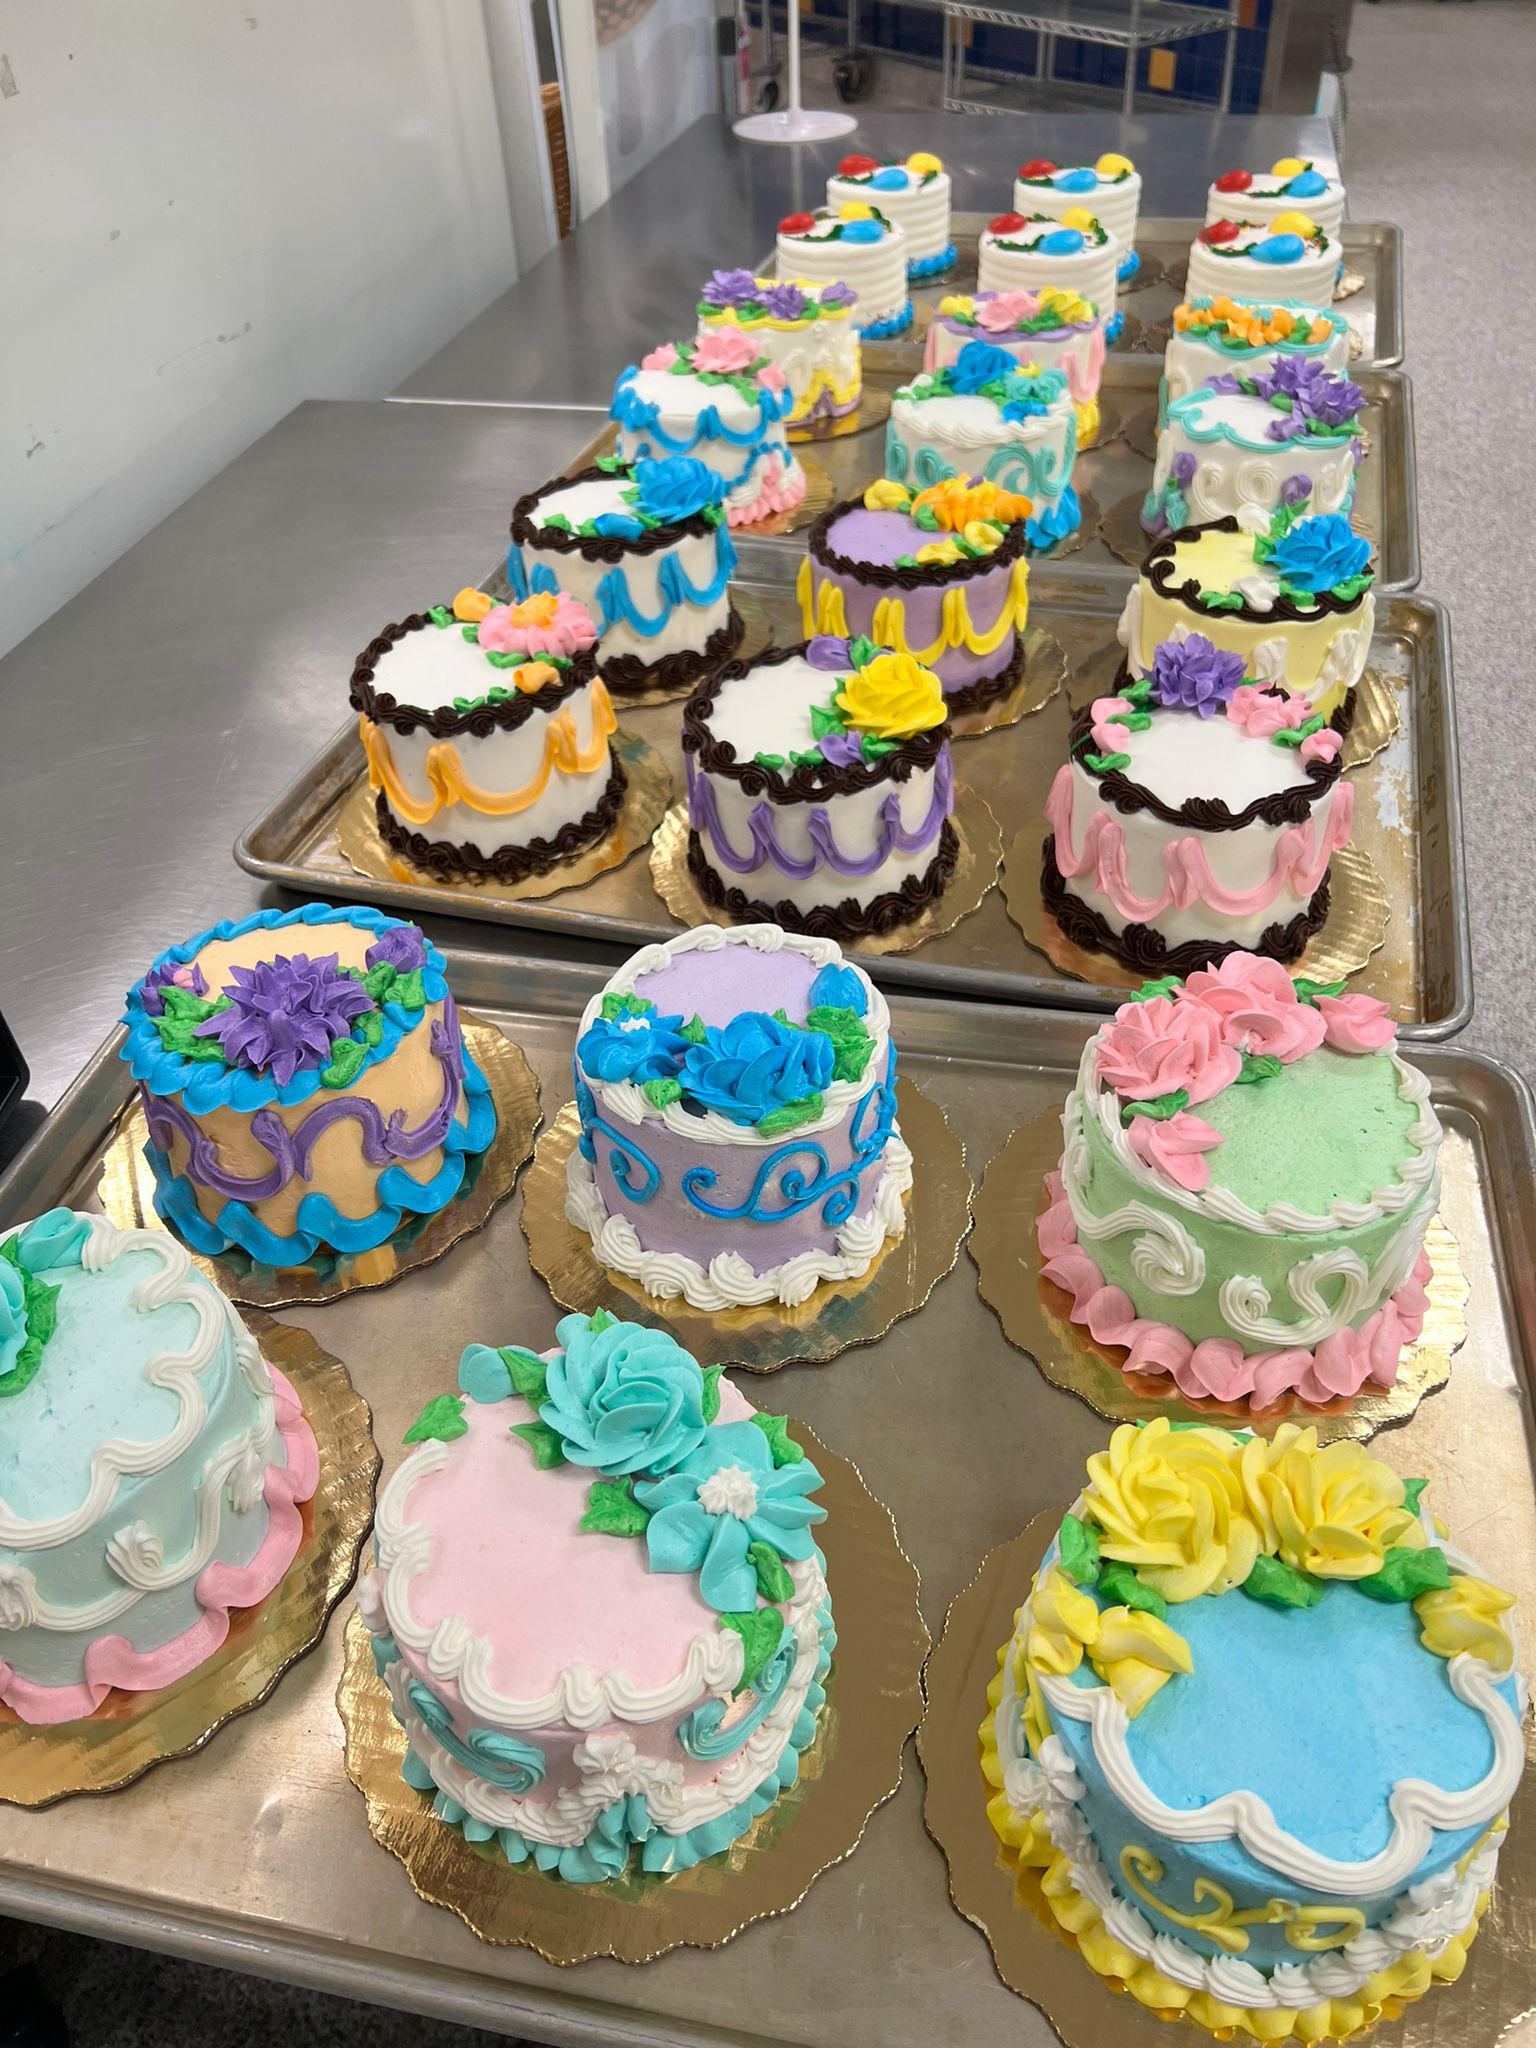 Multiple cakes decorated with colorful icing and flowers.